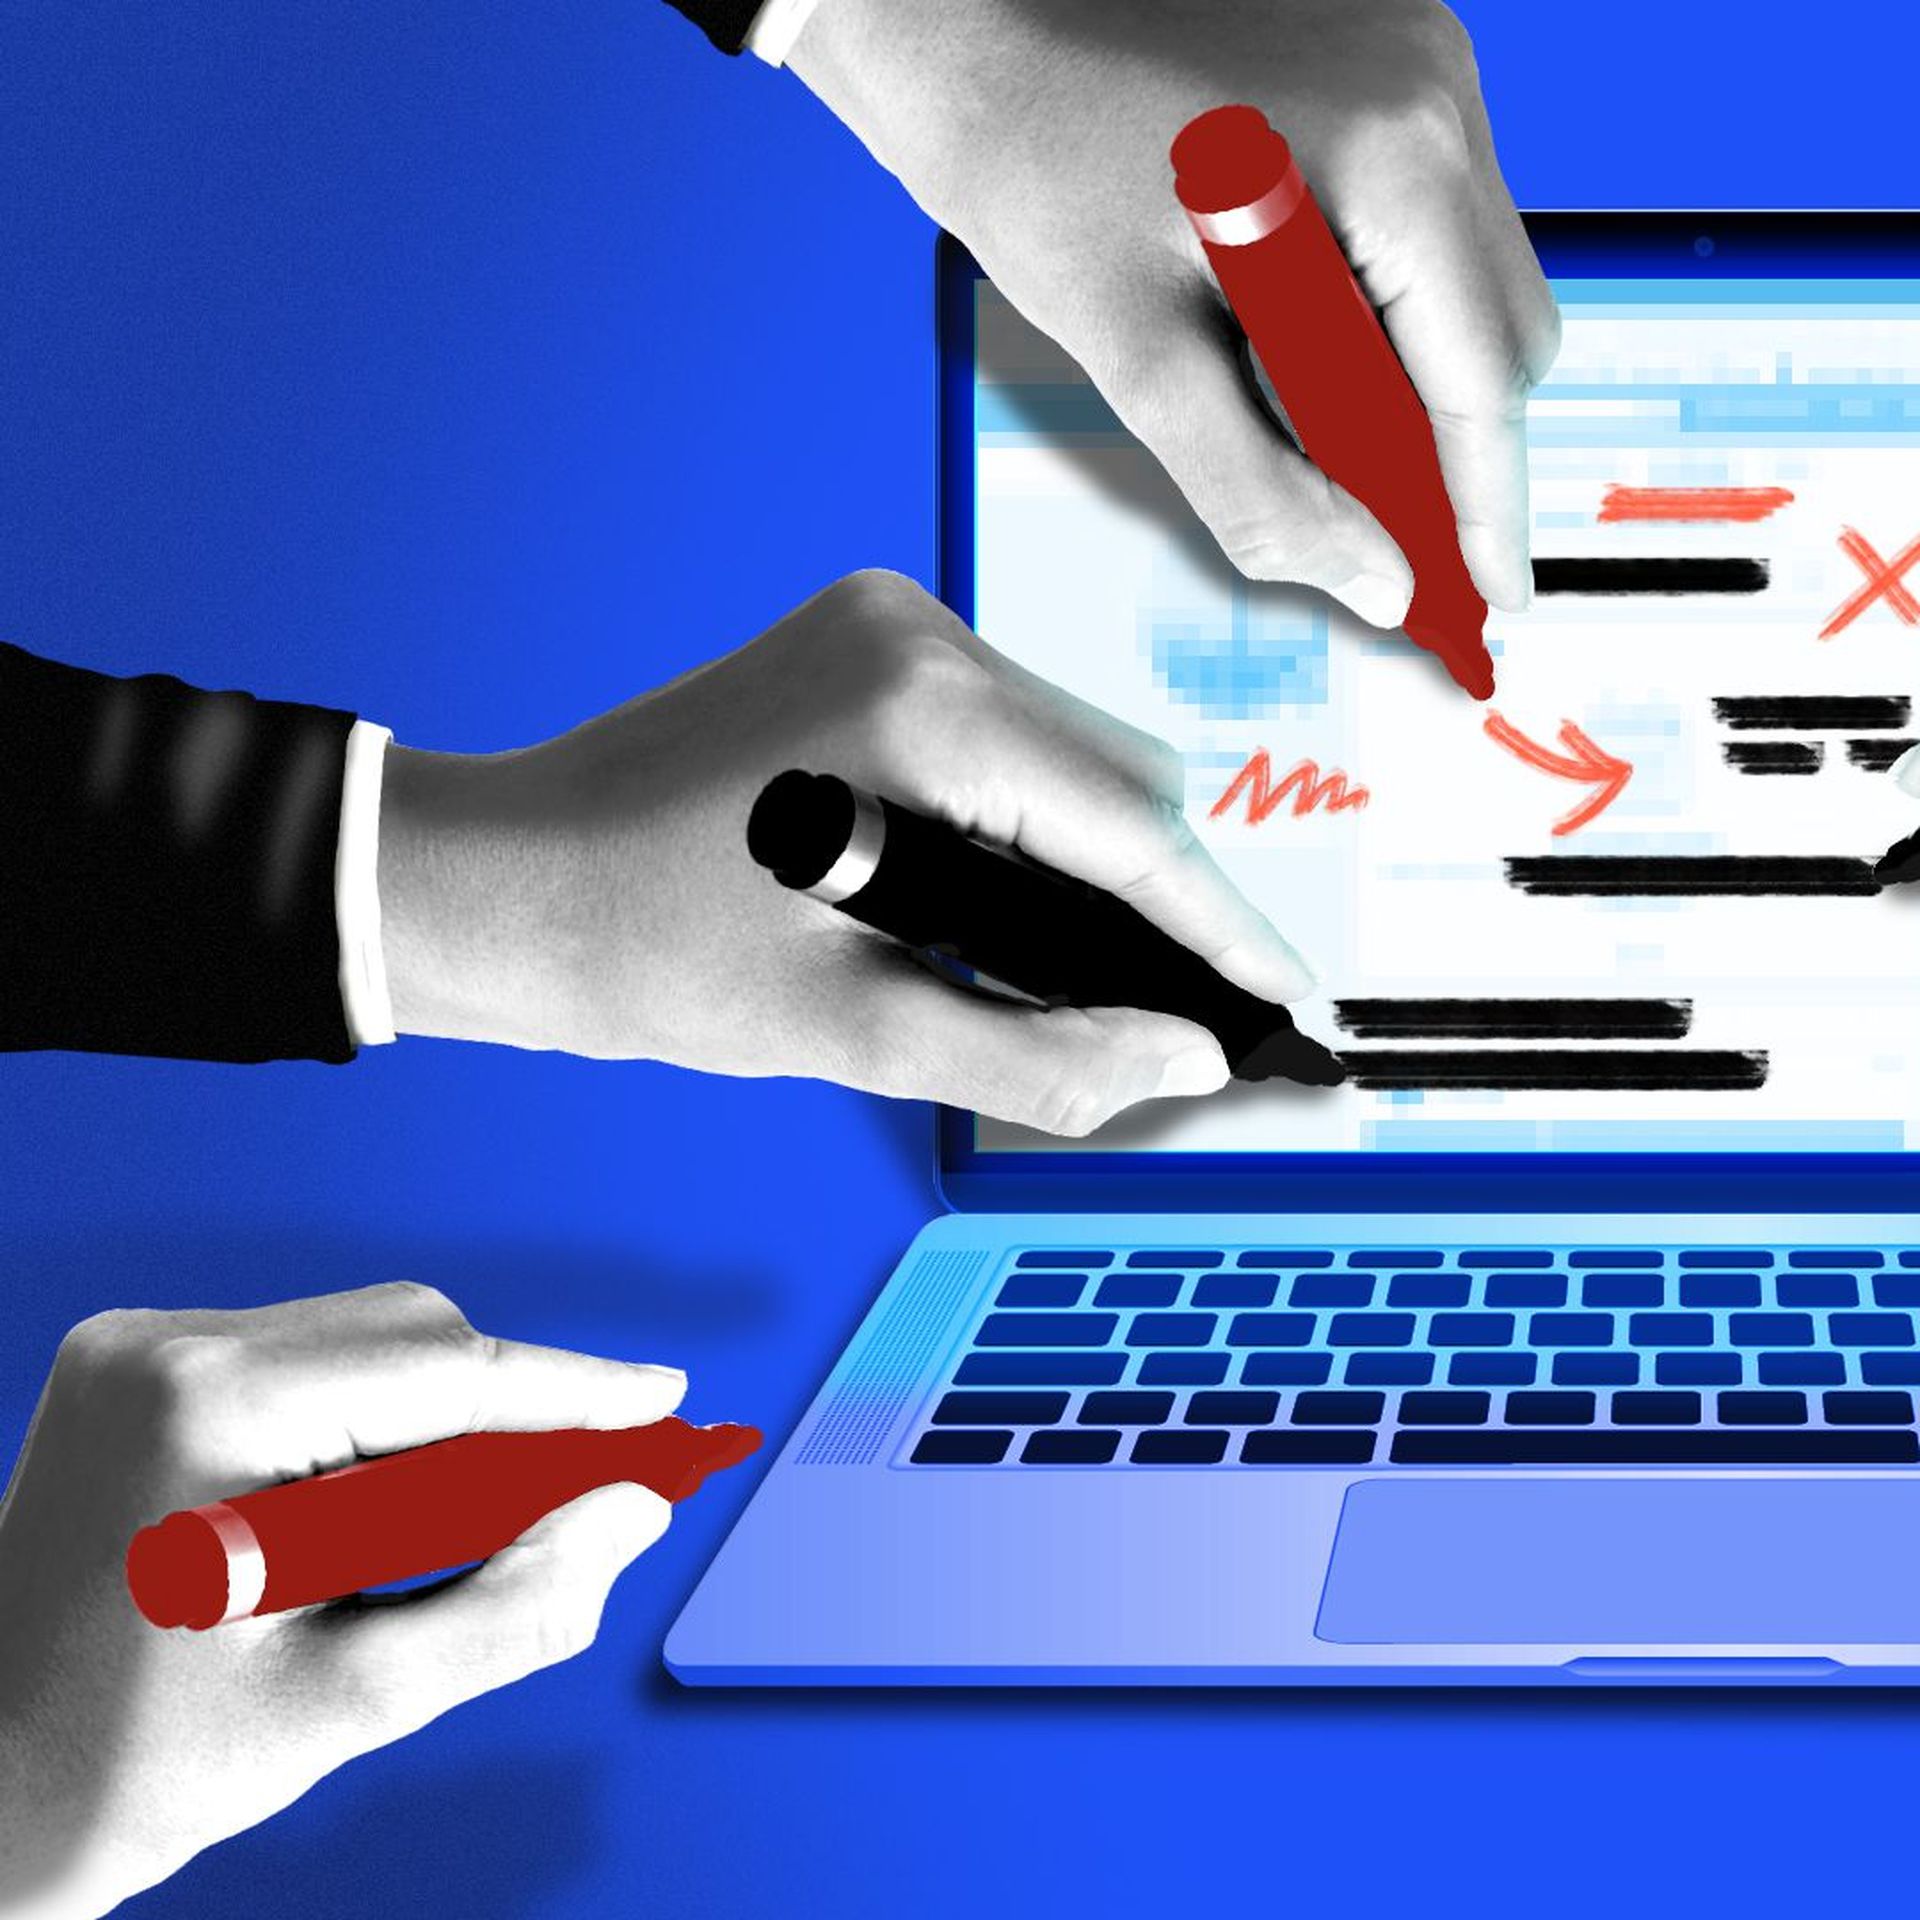 Illustration of hands with markers crossing out content on a laptop screen